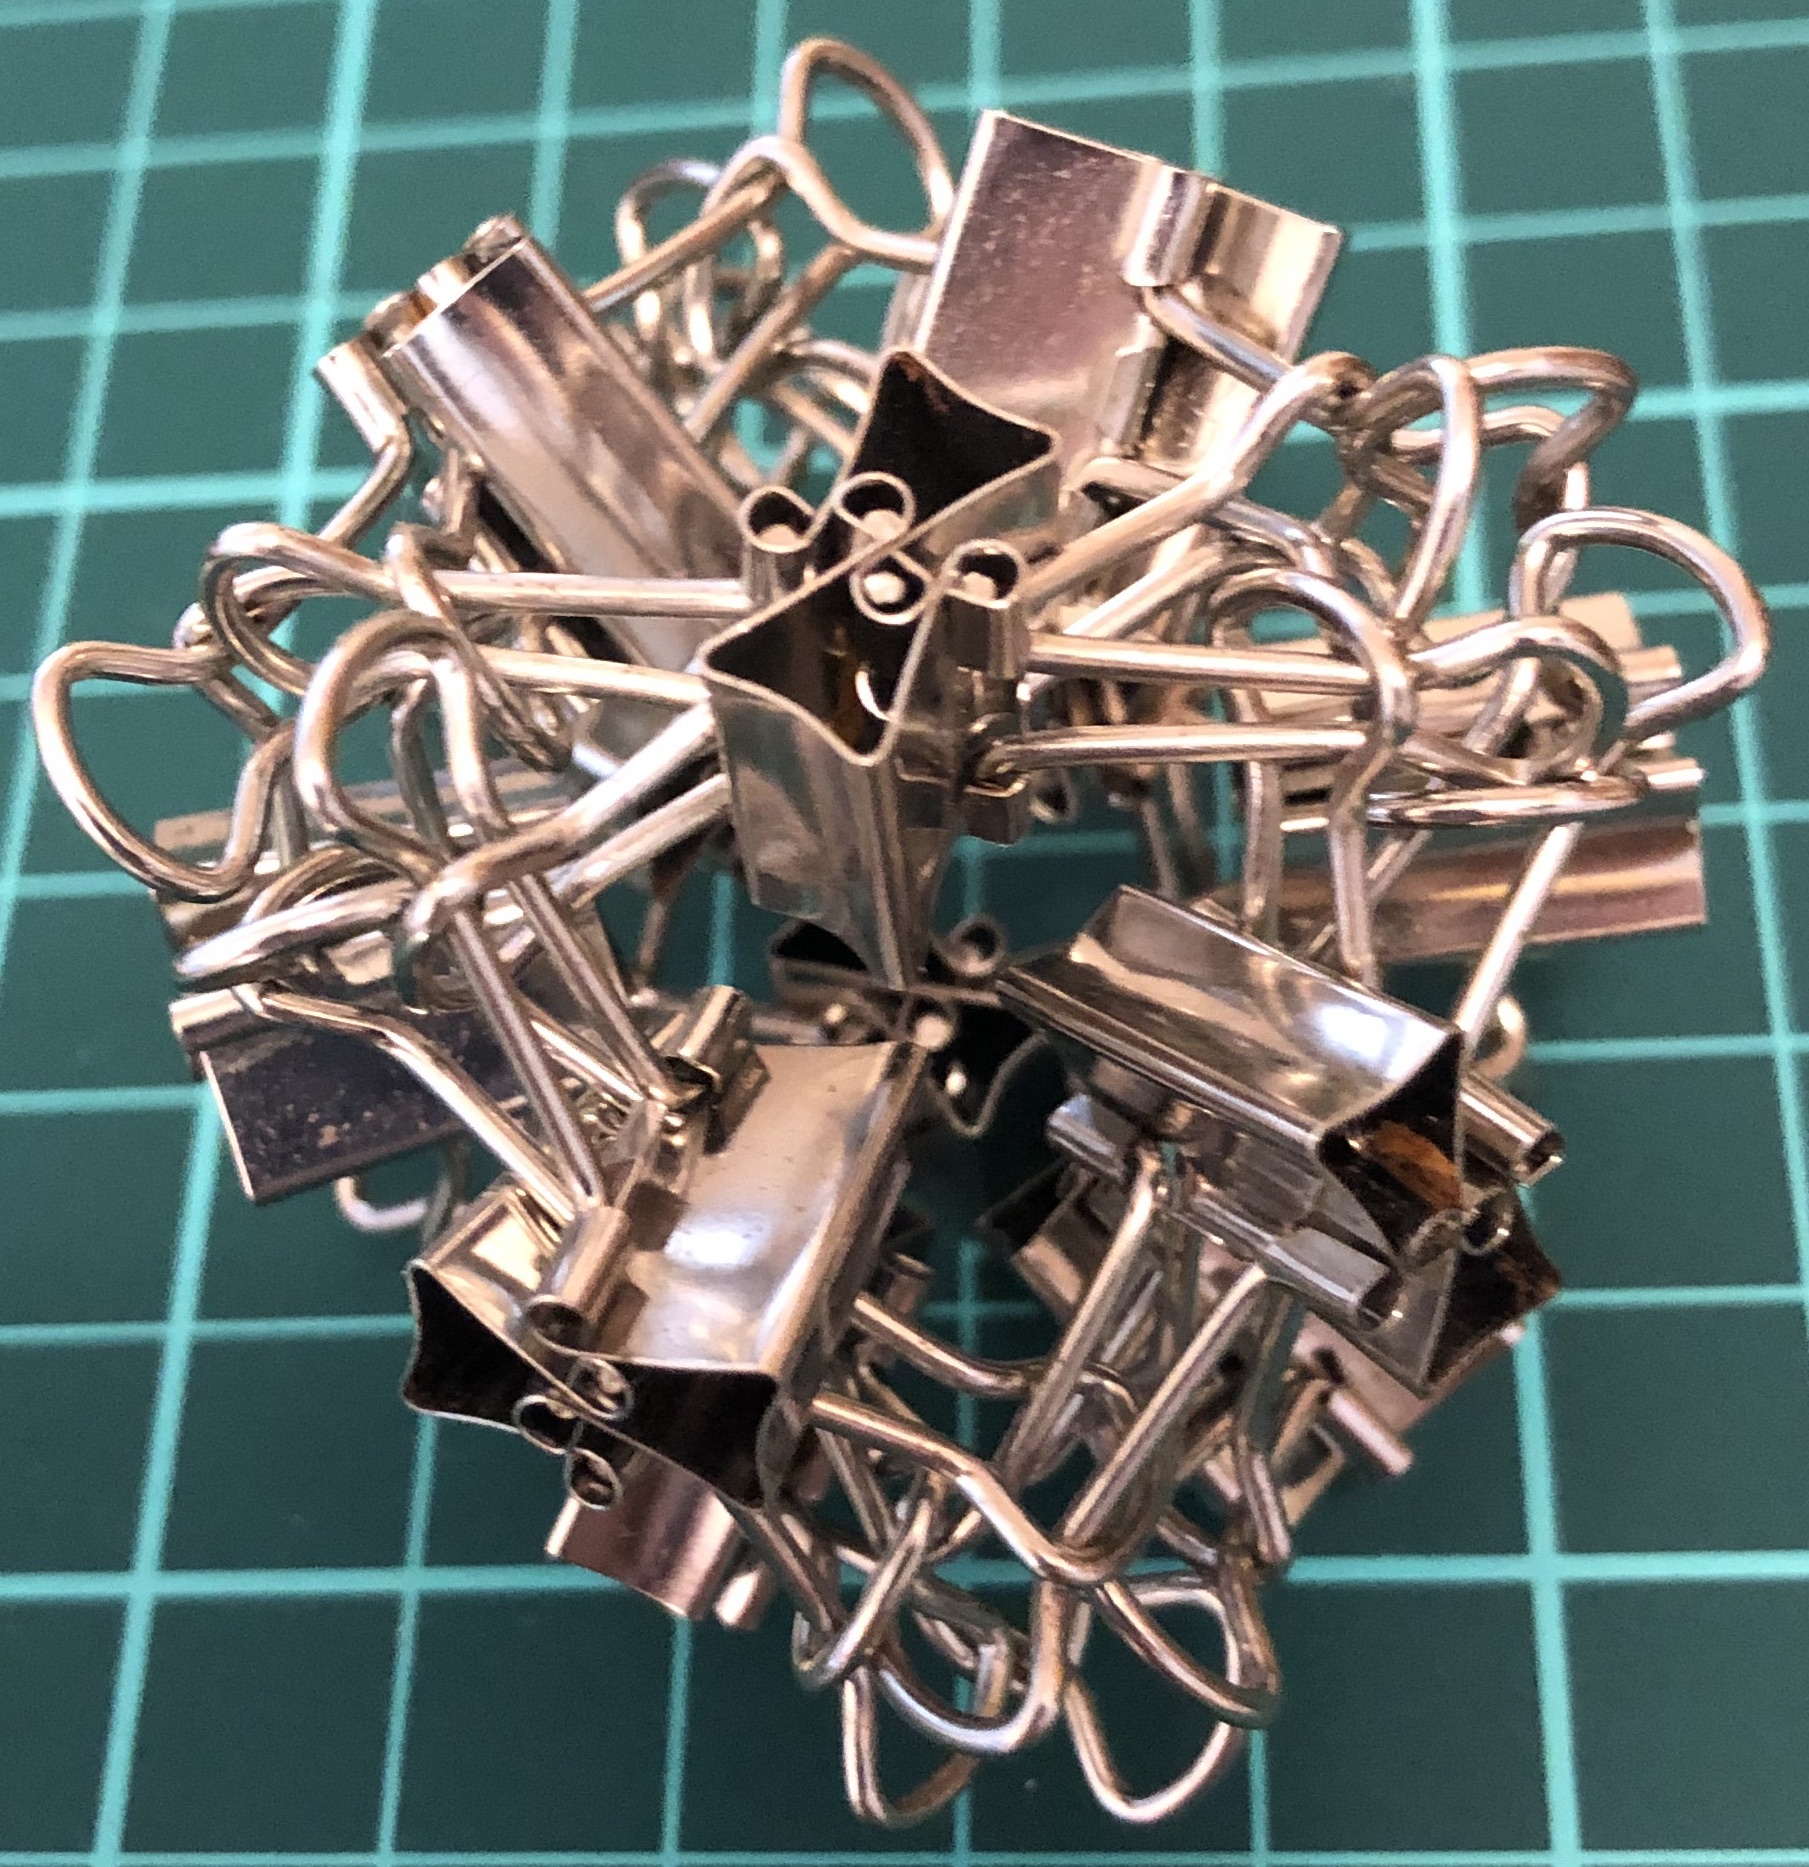 24 clips forming 12 I-edges forming octahedron